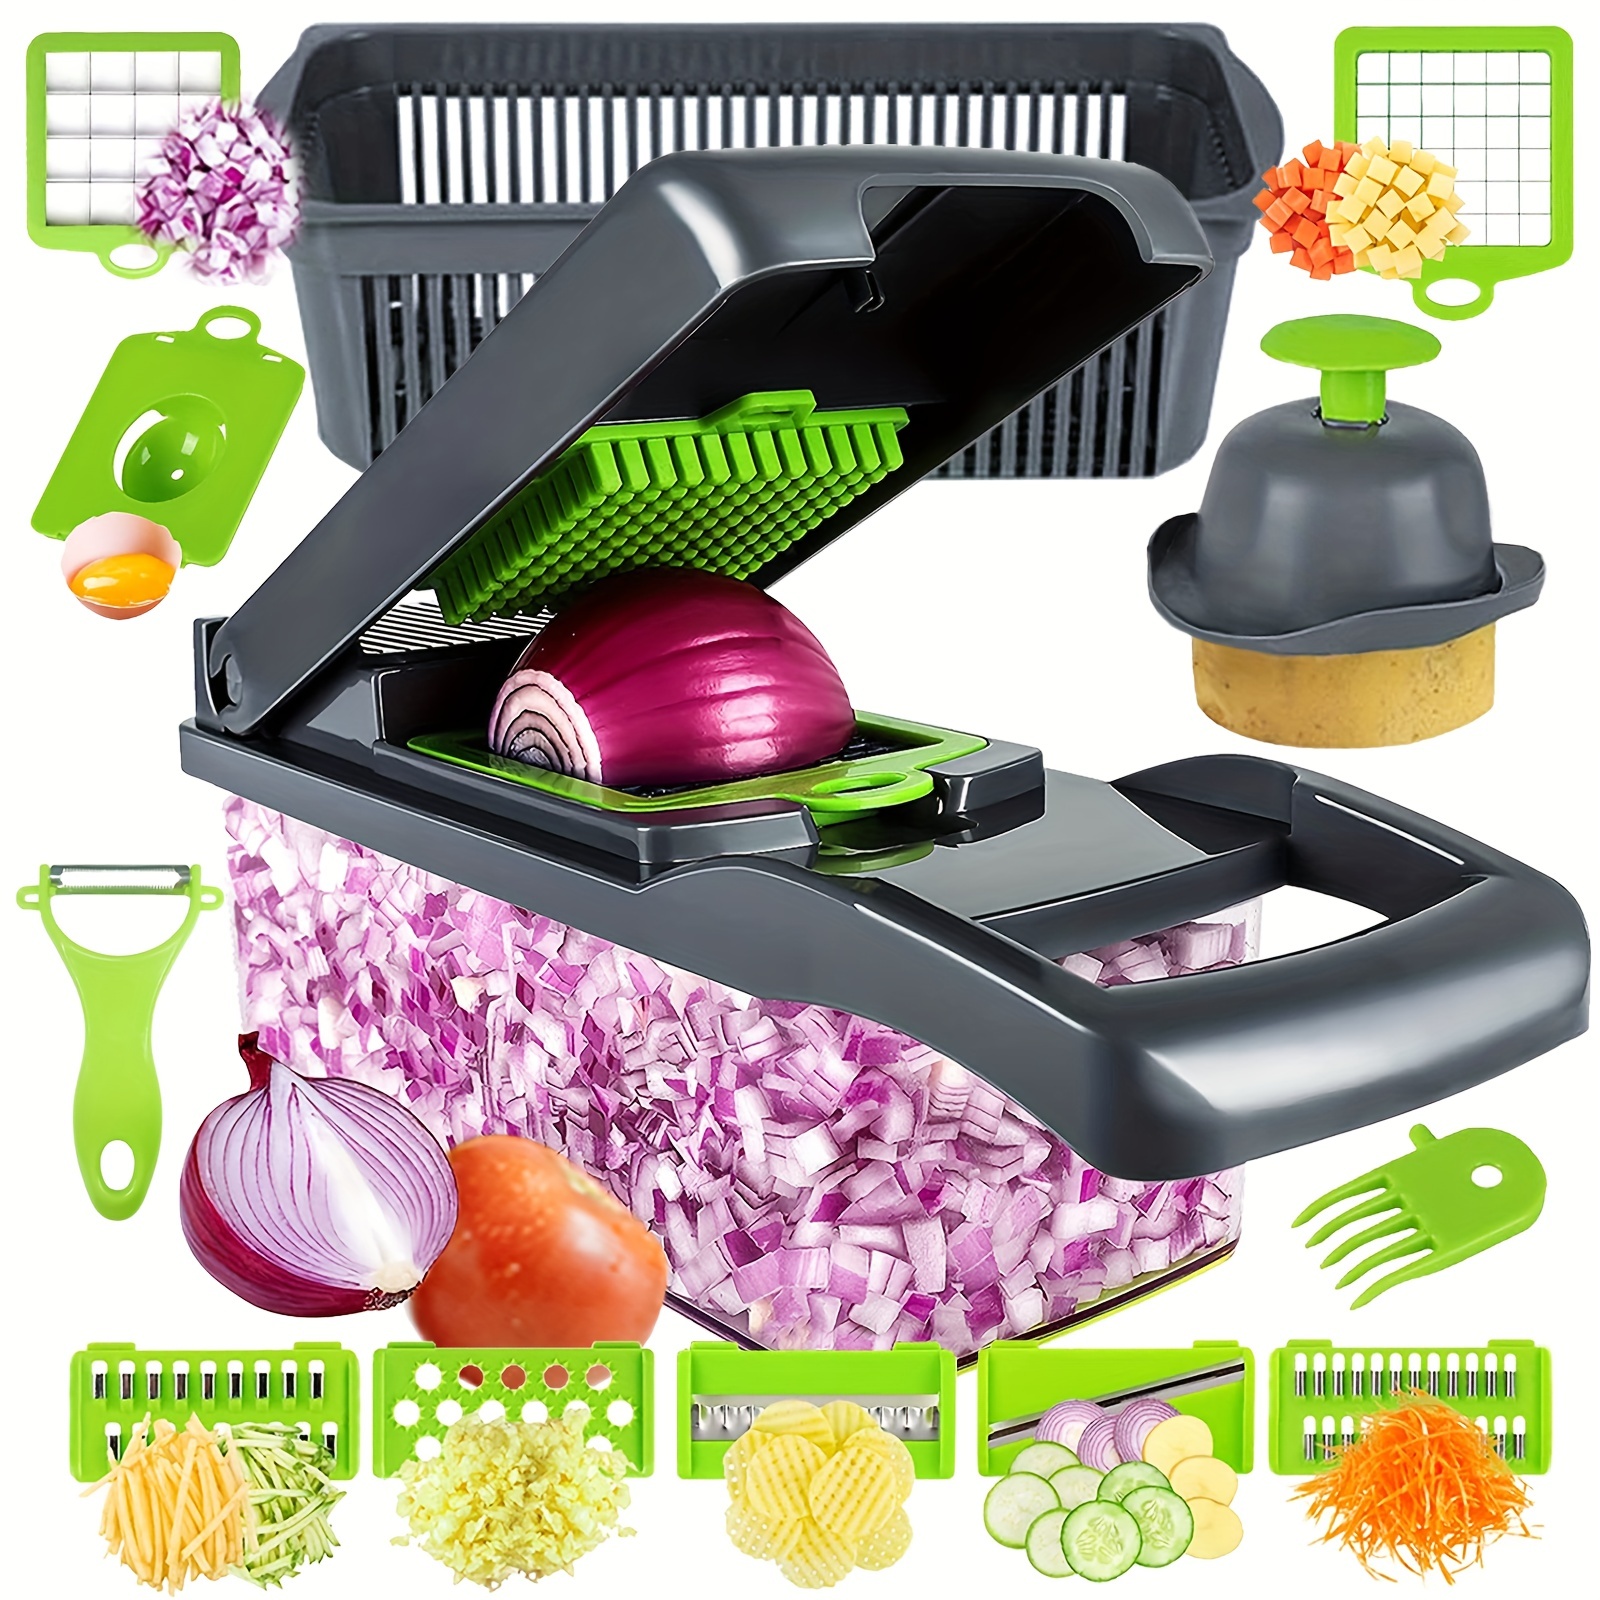 25in1 Multifunctional Vegetable Chopper With 10 Blades, Onion